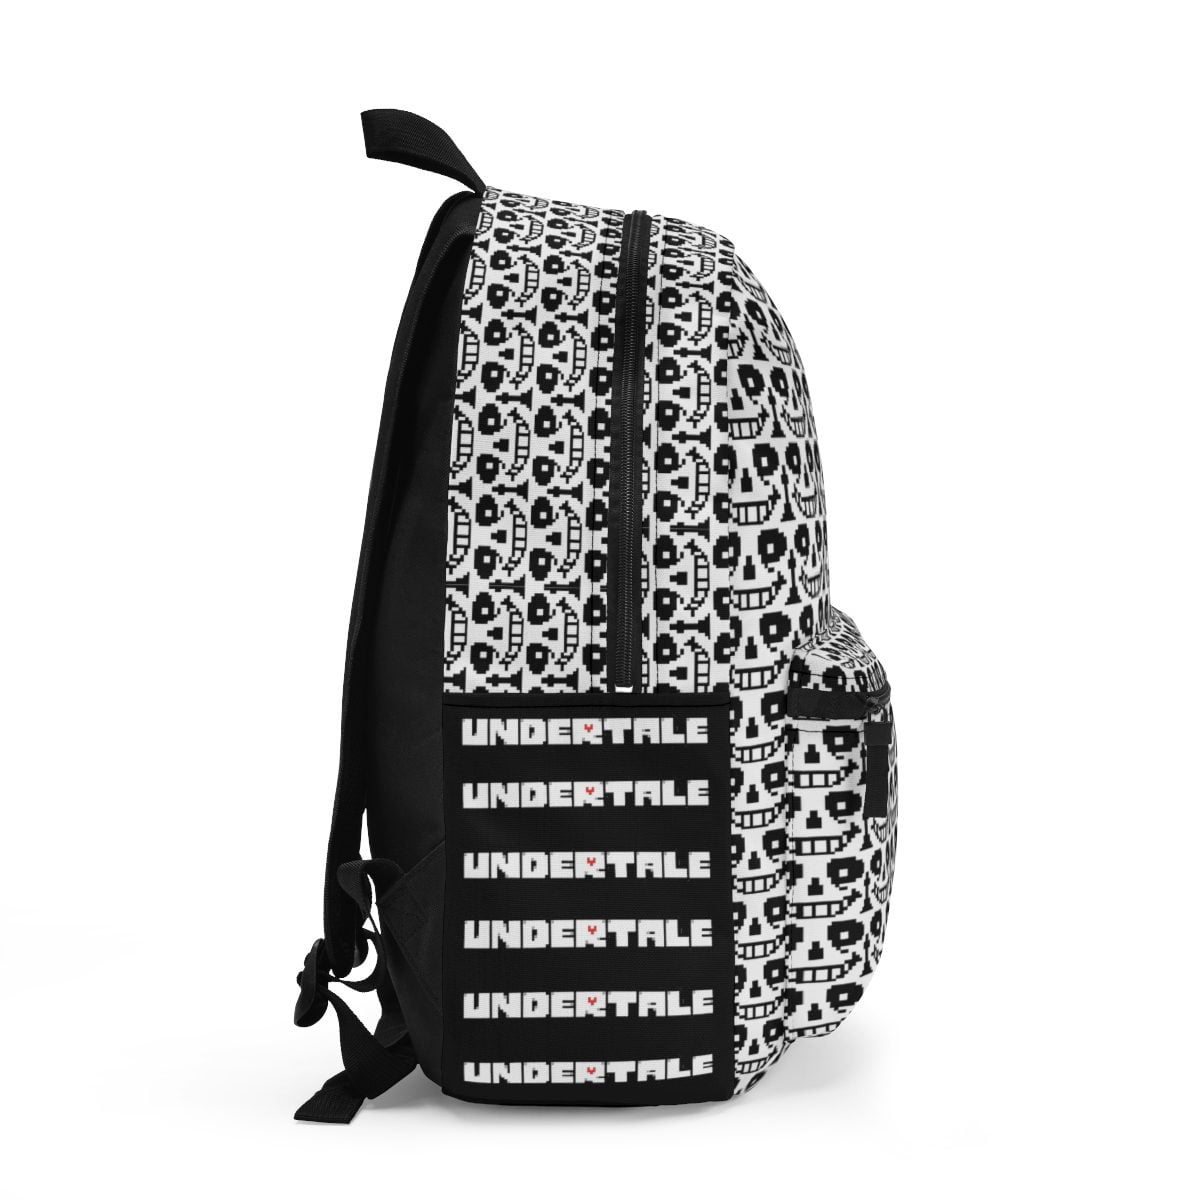 Undertale 2 (Shadows of Time) Monochromatic Backpack Cool Kiddo 12